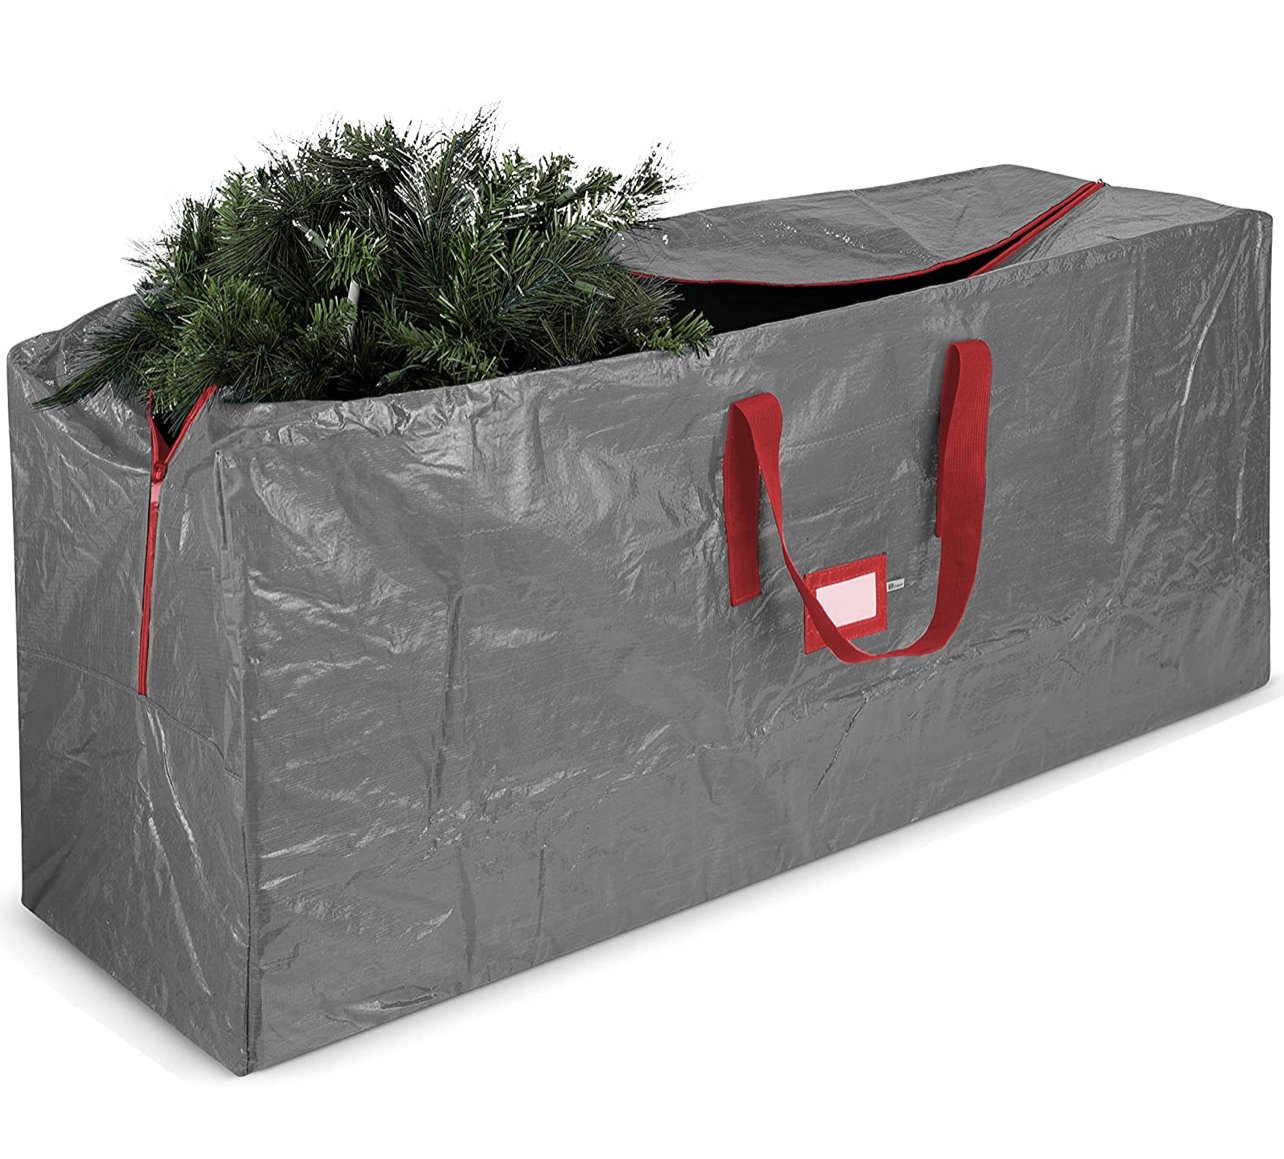  These bags are awesome for greenery/garlands, wreaths, lights, and smaller trees, as well as larger decor pieces that will take up an entire tub! 